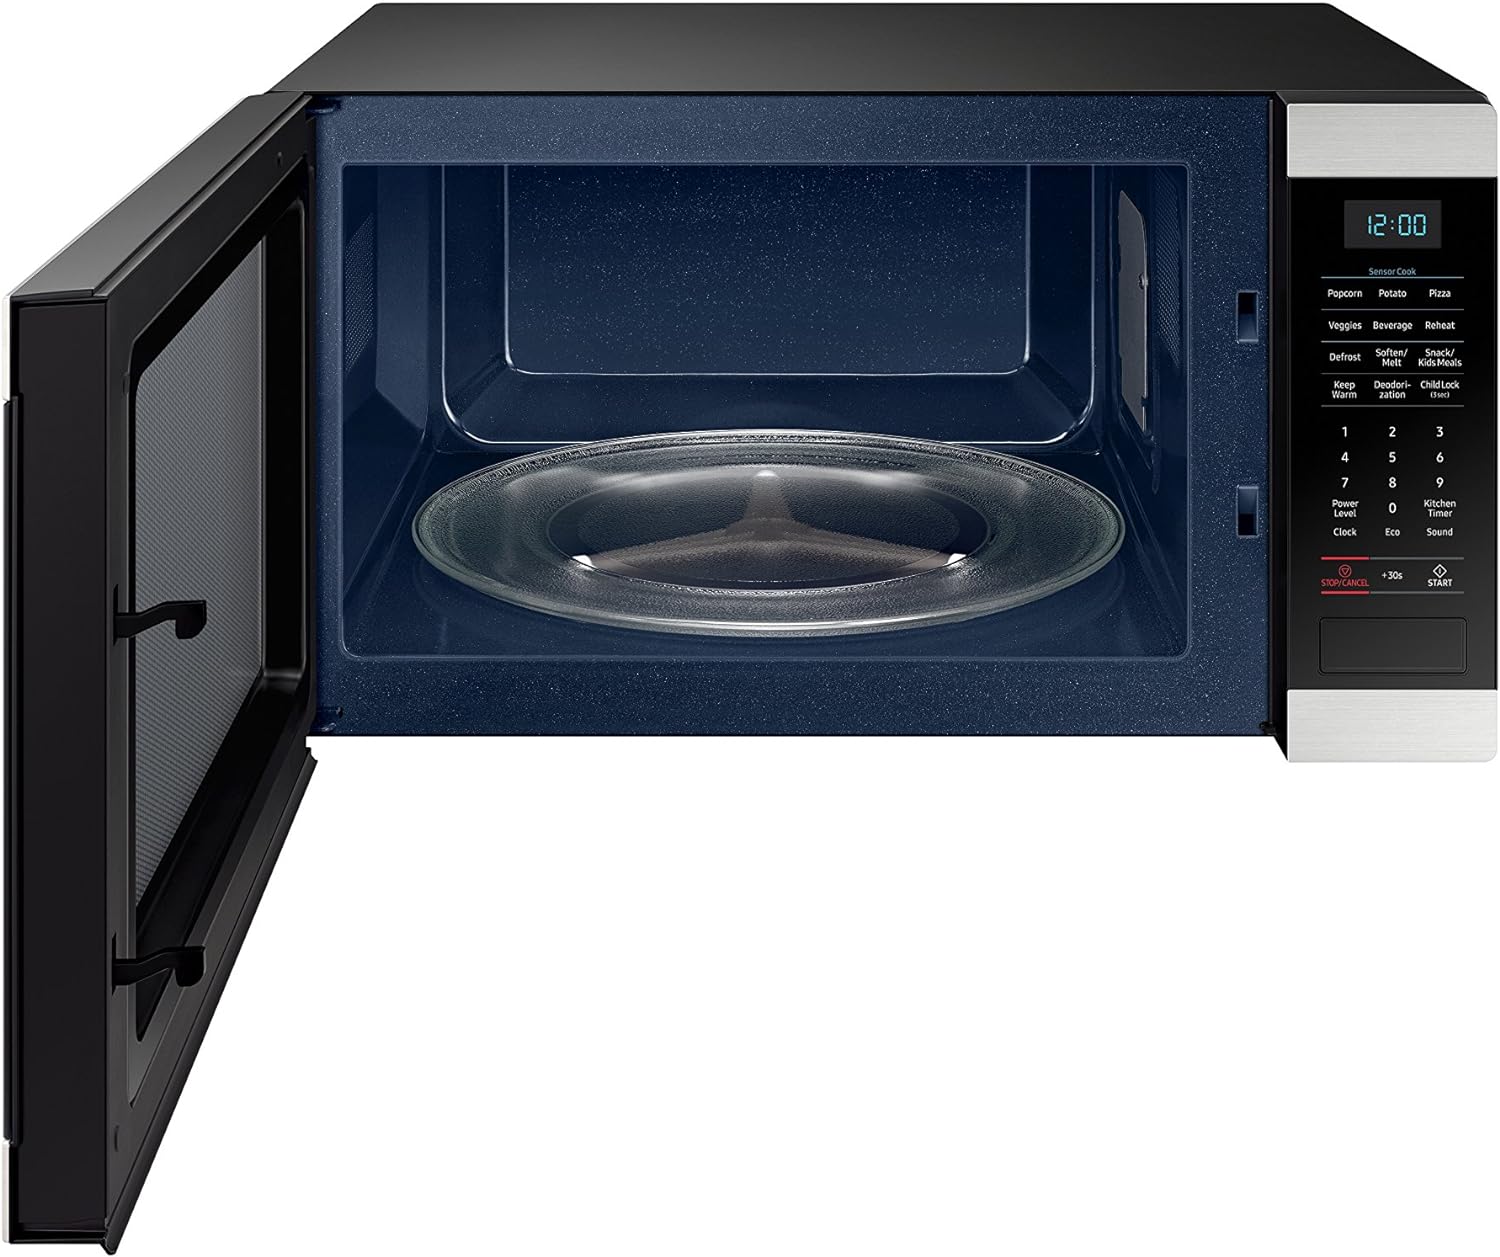 A front-opening microwave oven